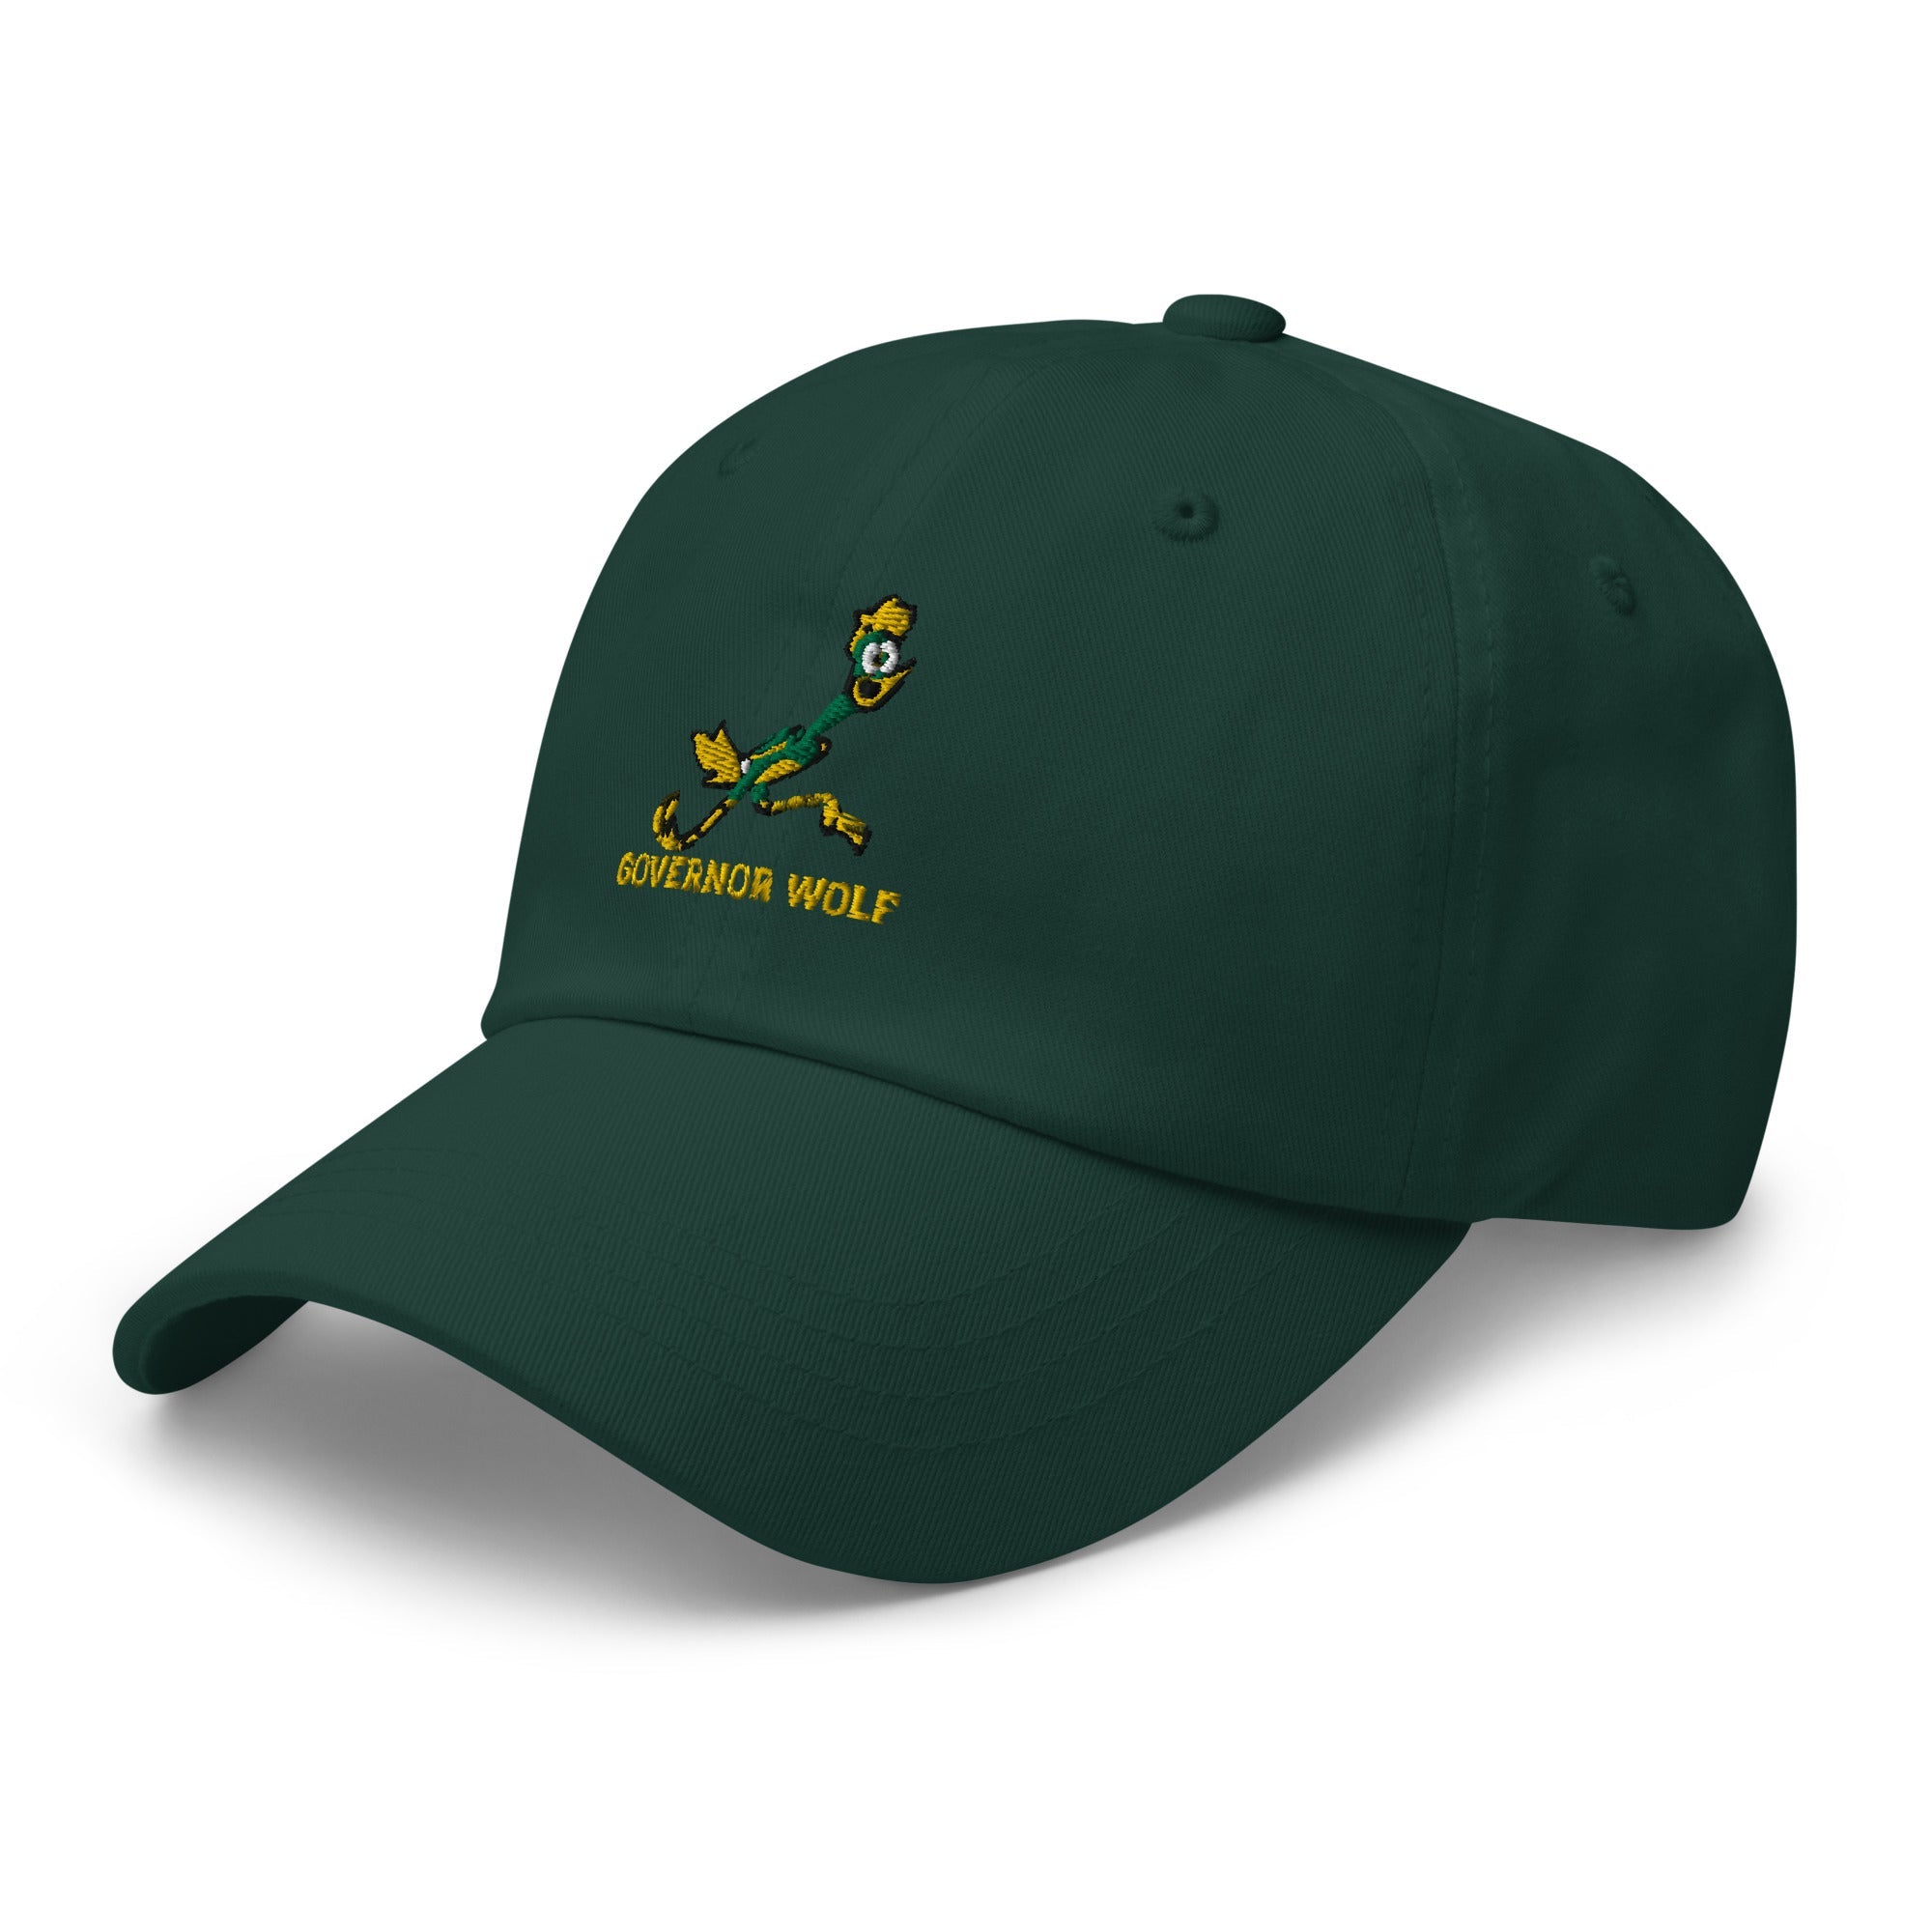 GOVERNOR WOLF Dad hat